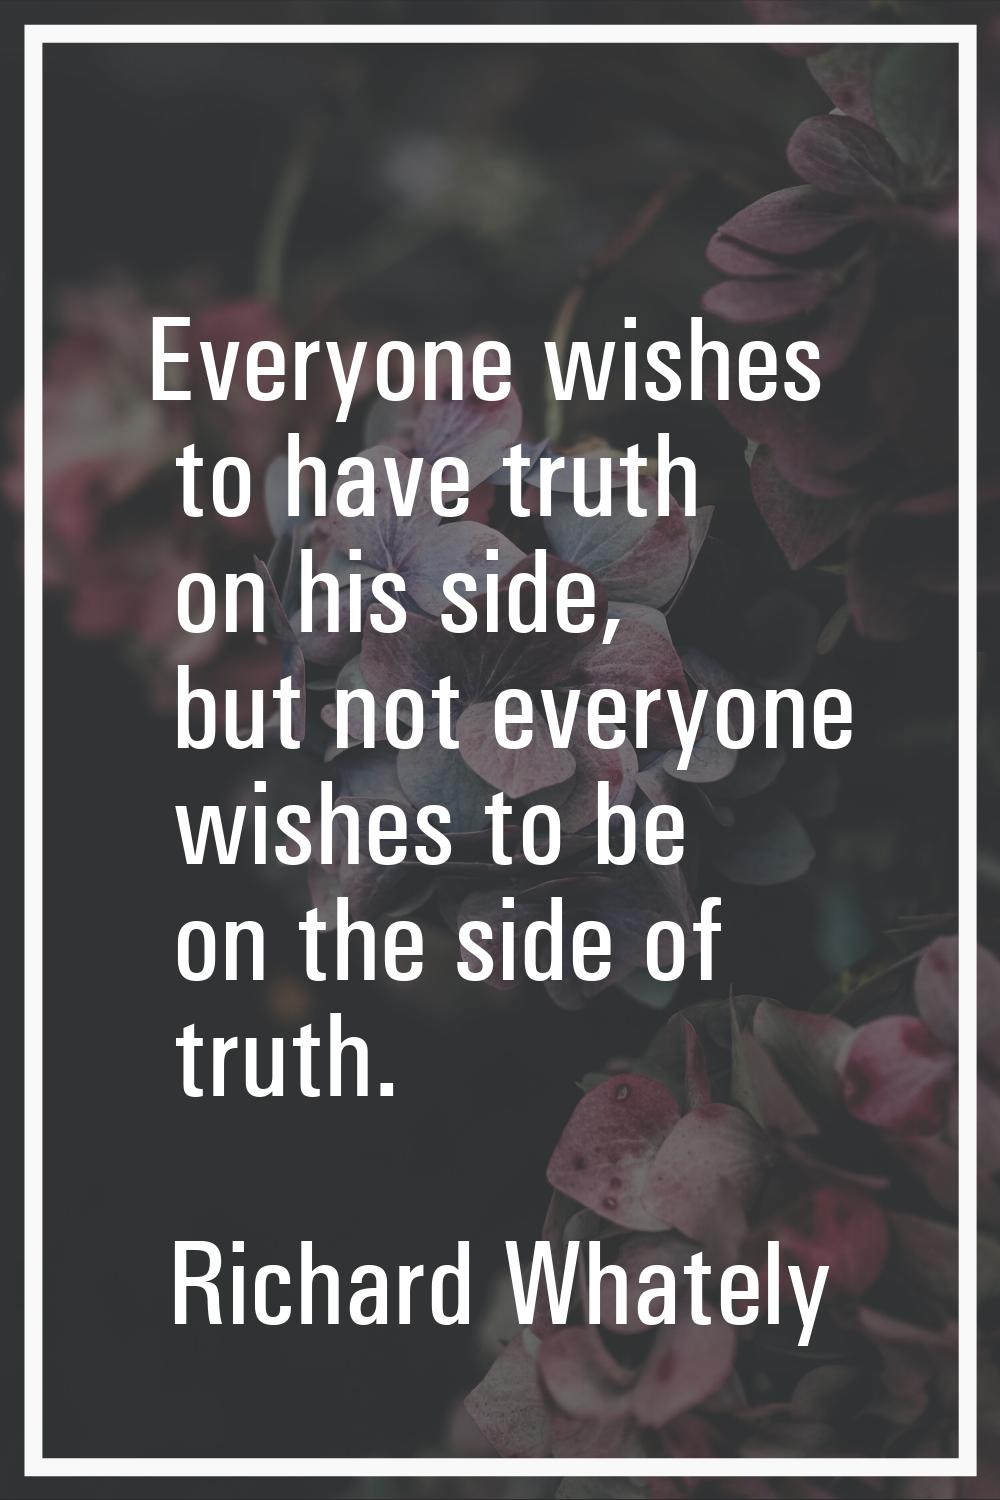 Everyone wishes to have truth on his side, but not everyone wishes to be on the side of truth.